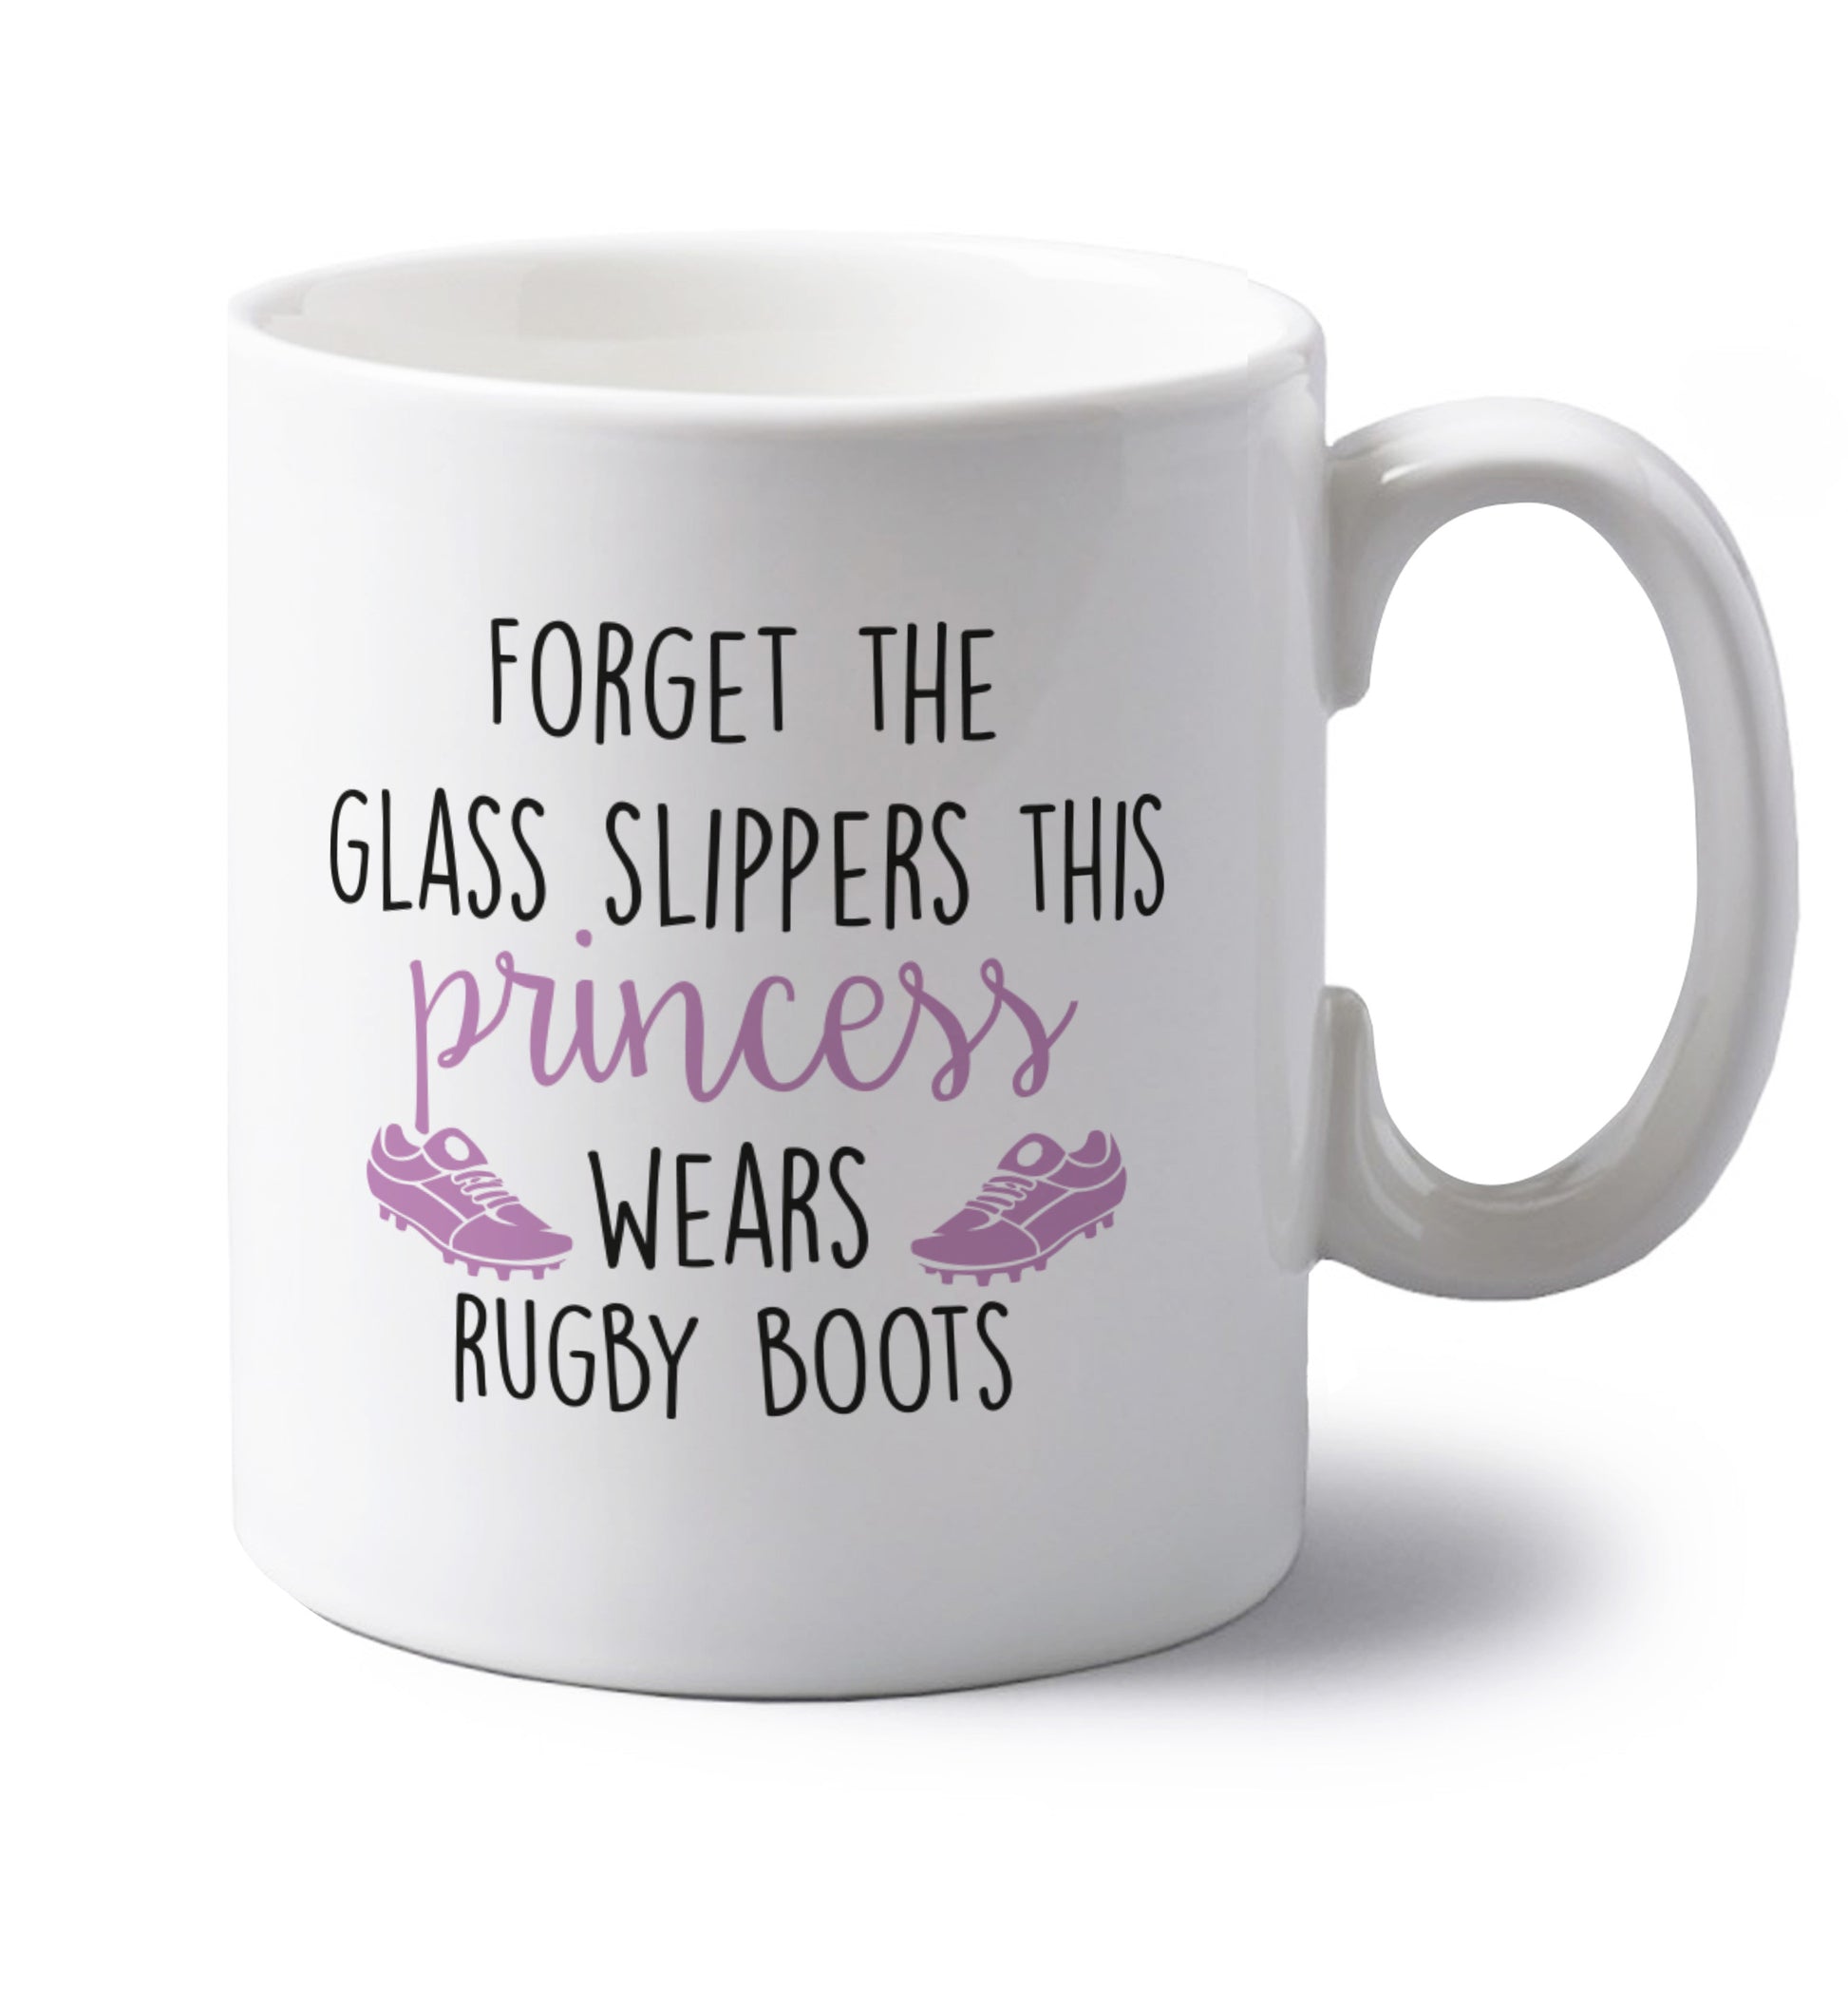 Forget the glass slippers this princess wears rugby boots left handed white ceramic mug 